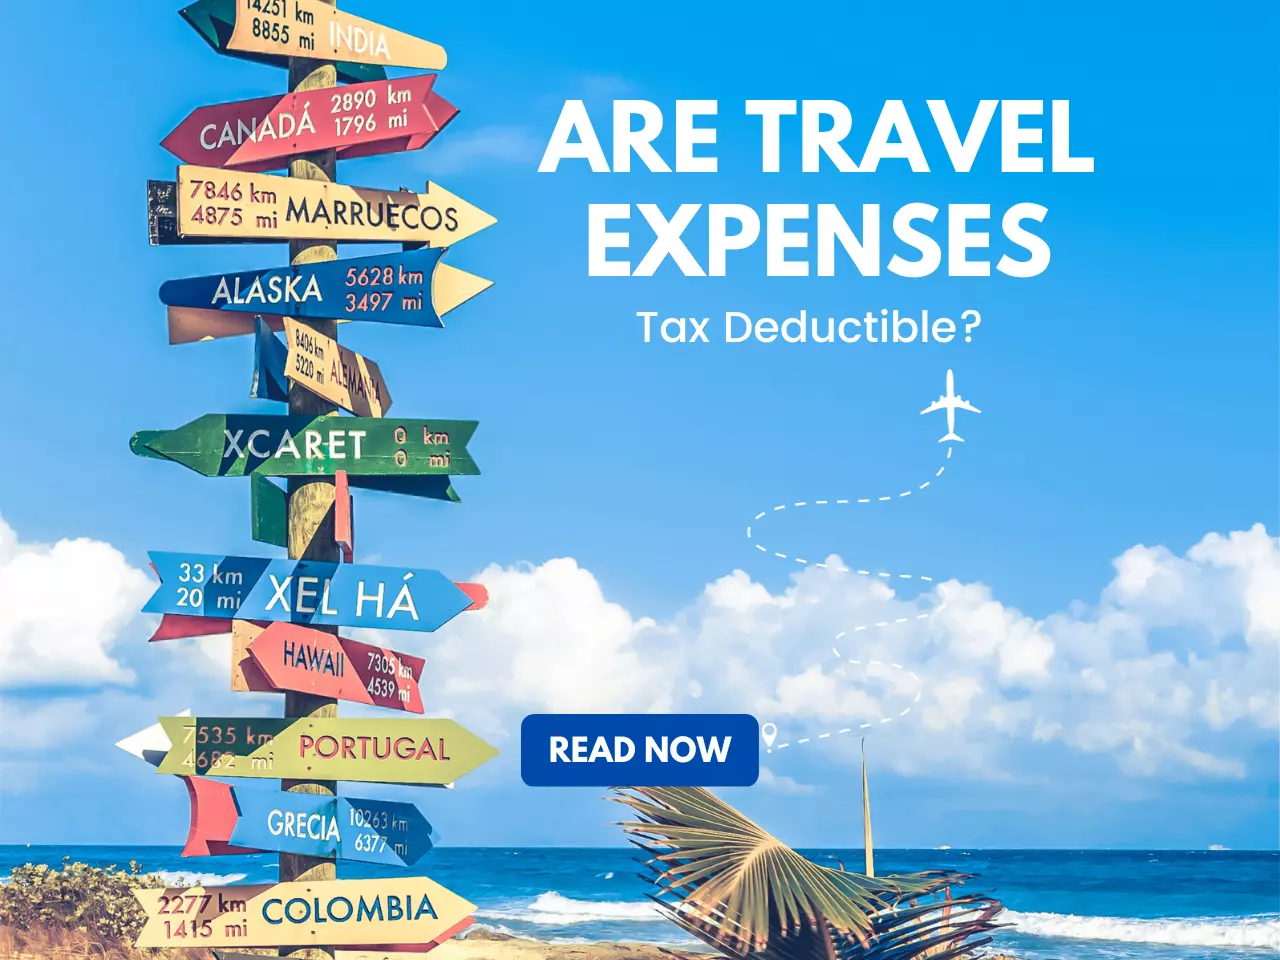 Are Travel Expenses Deductible